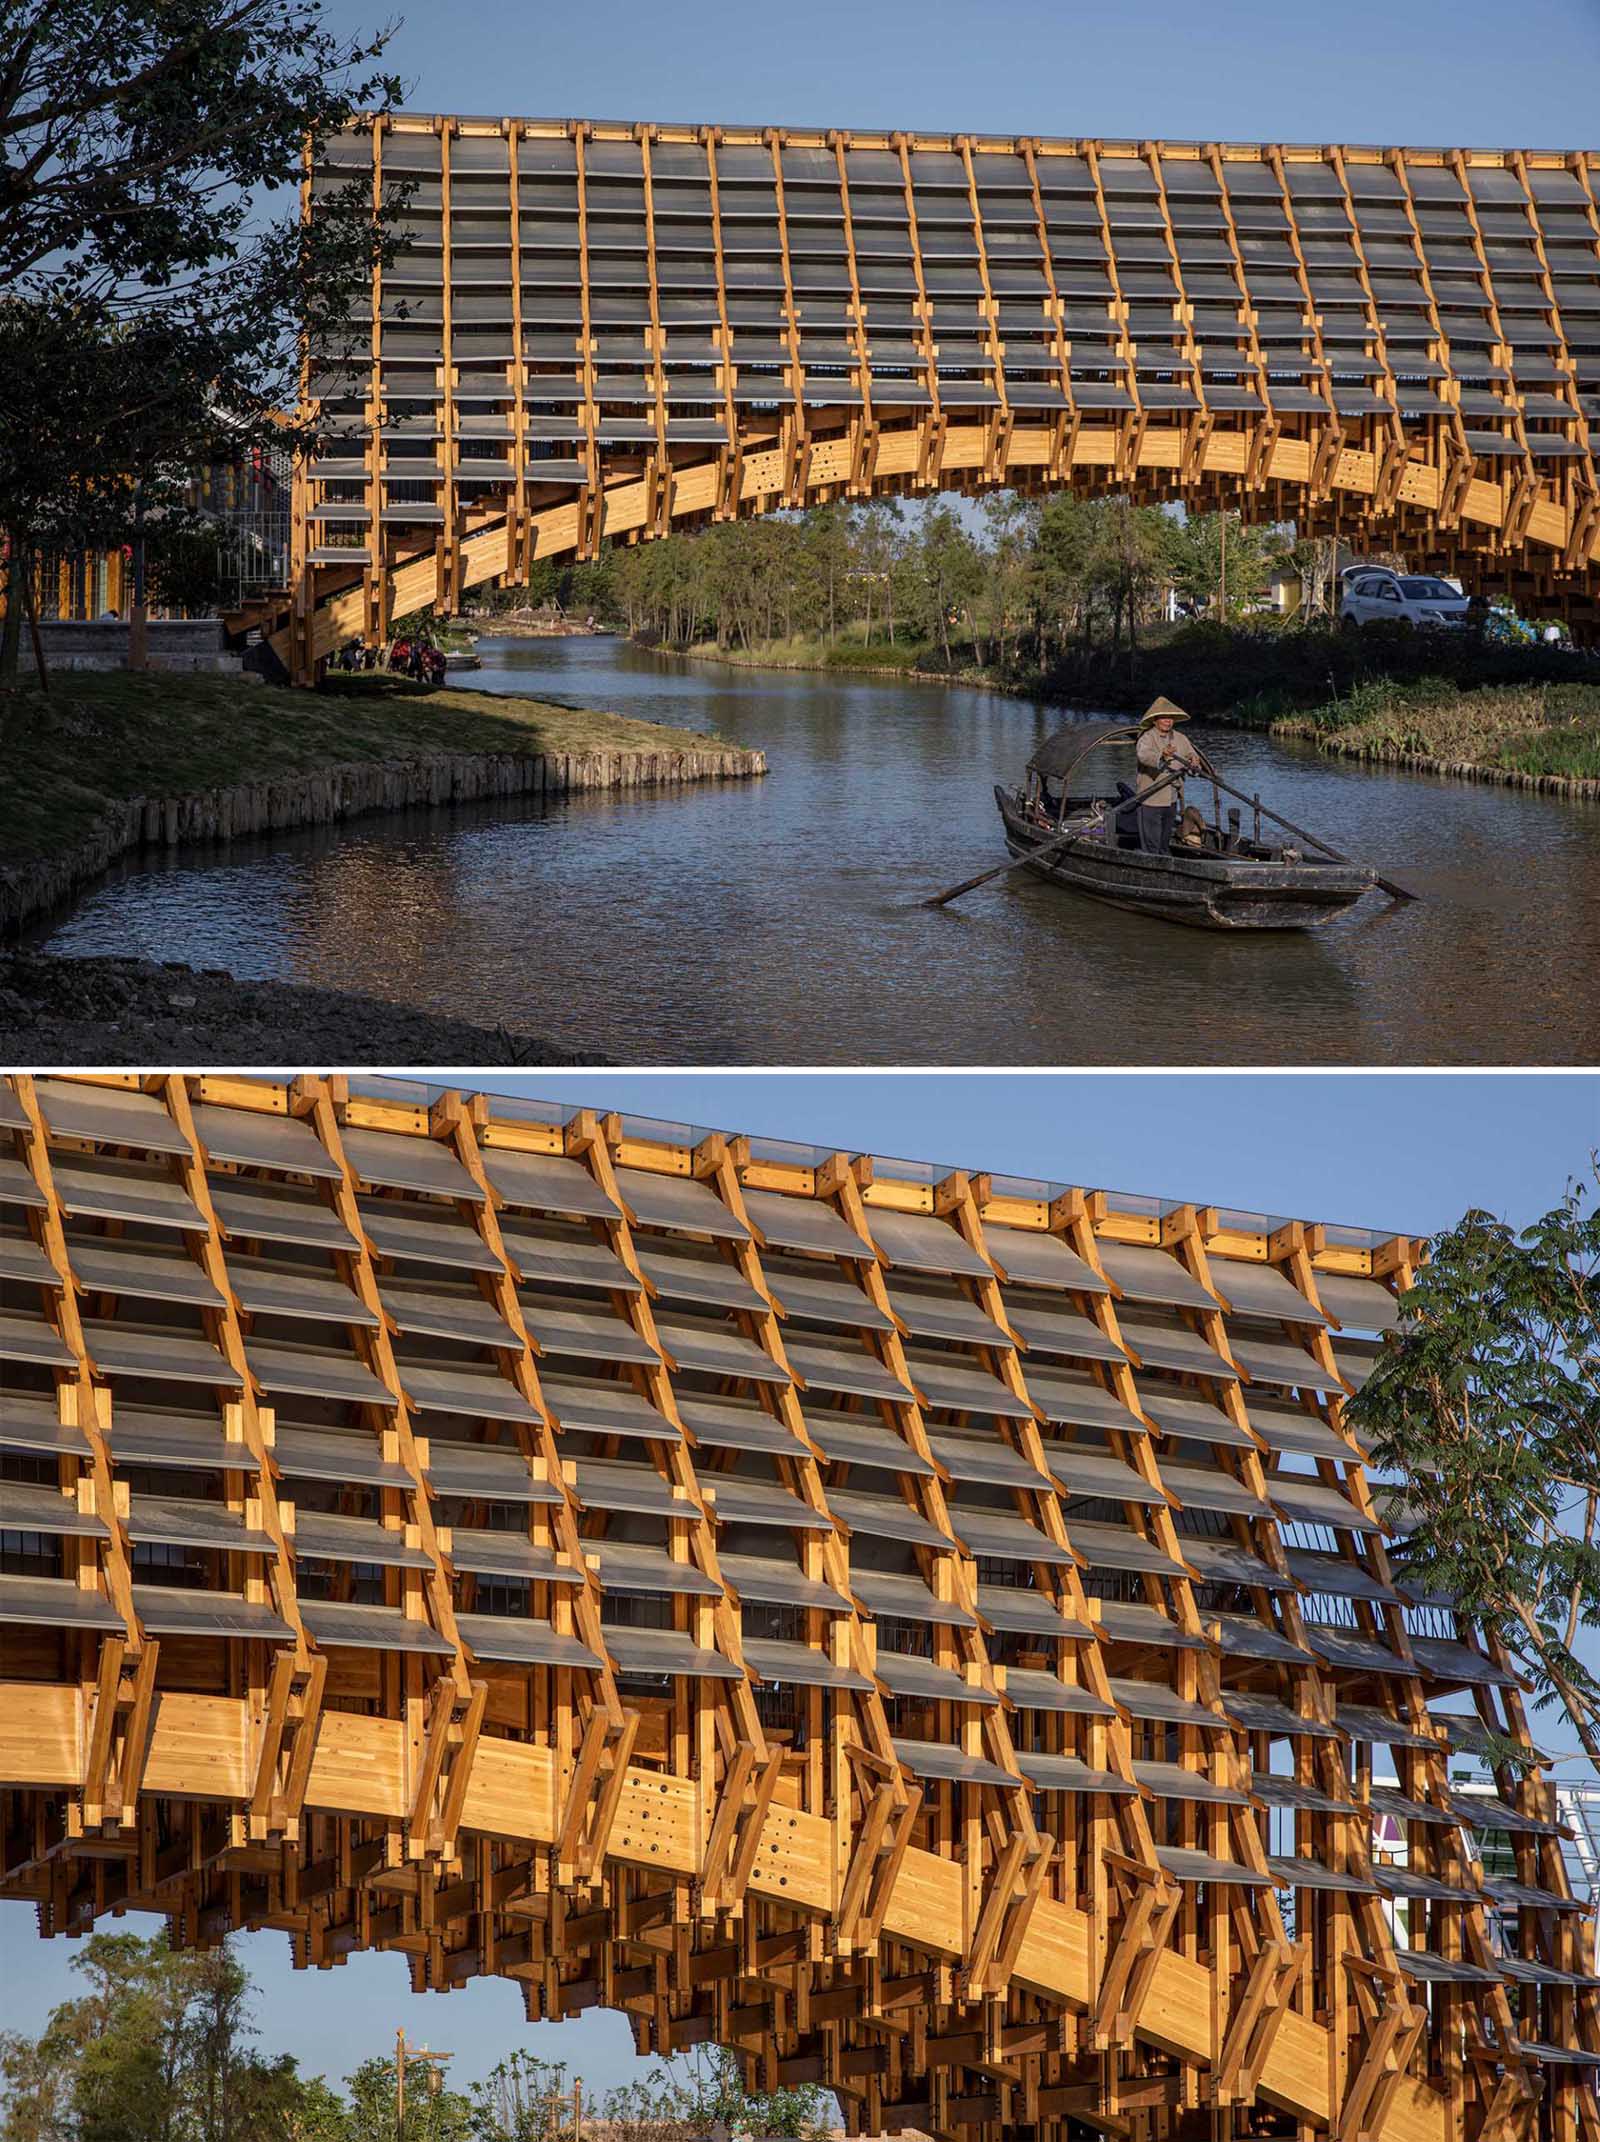 An arched pedestrian bridge made from wood allows traditional fishing boast to pass underneath.